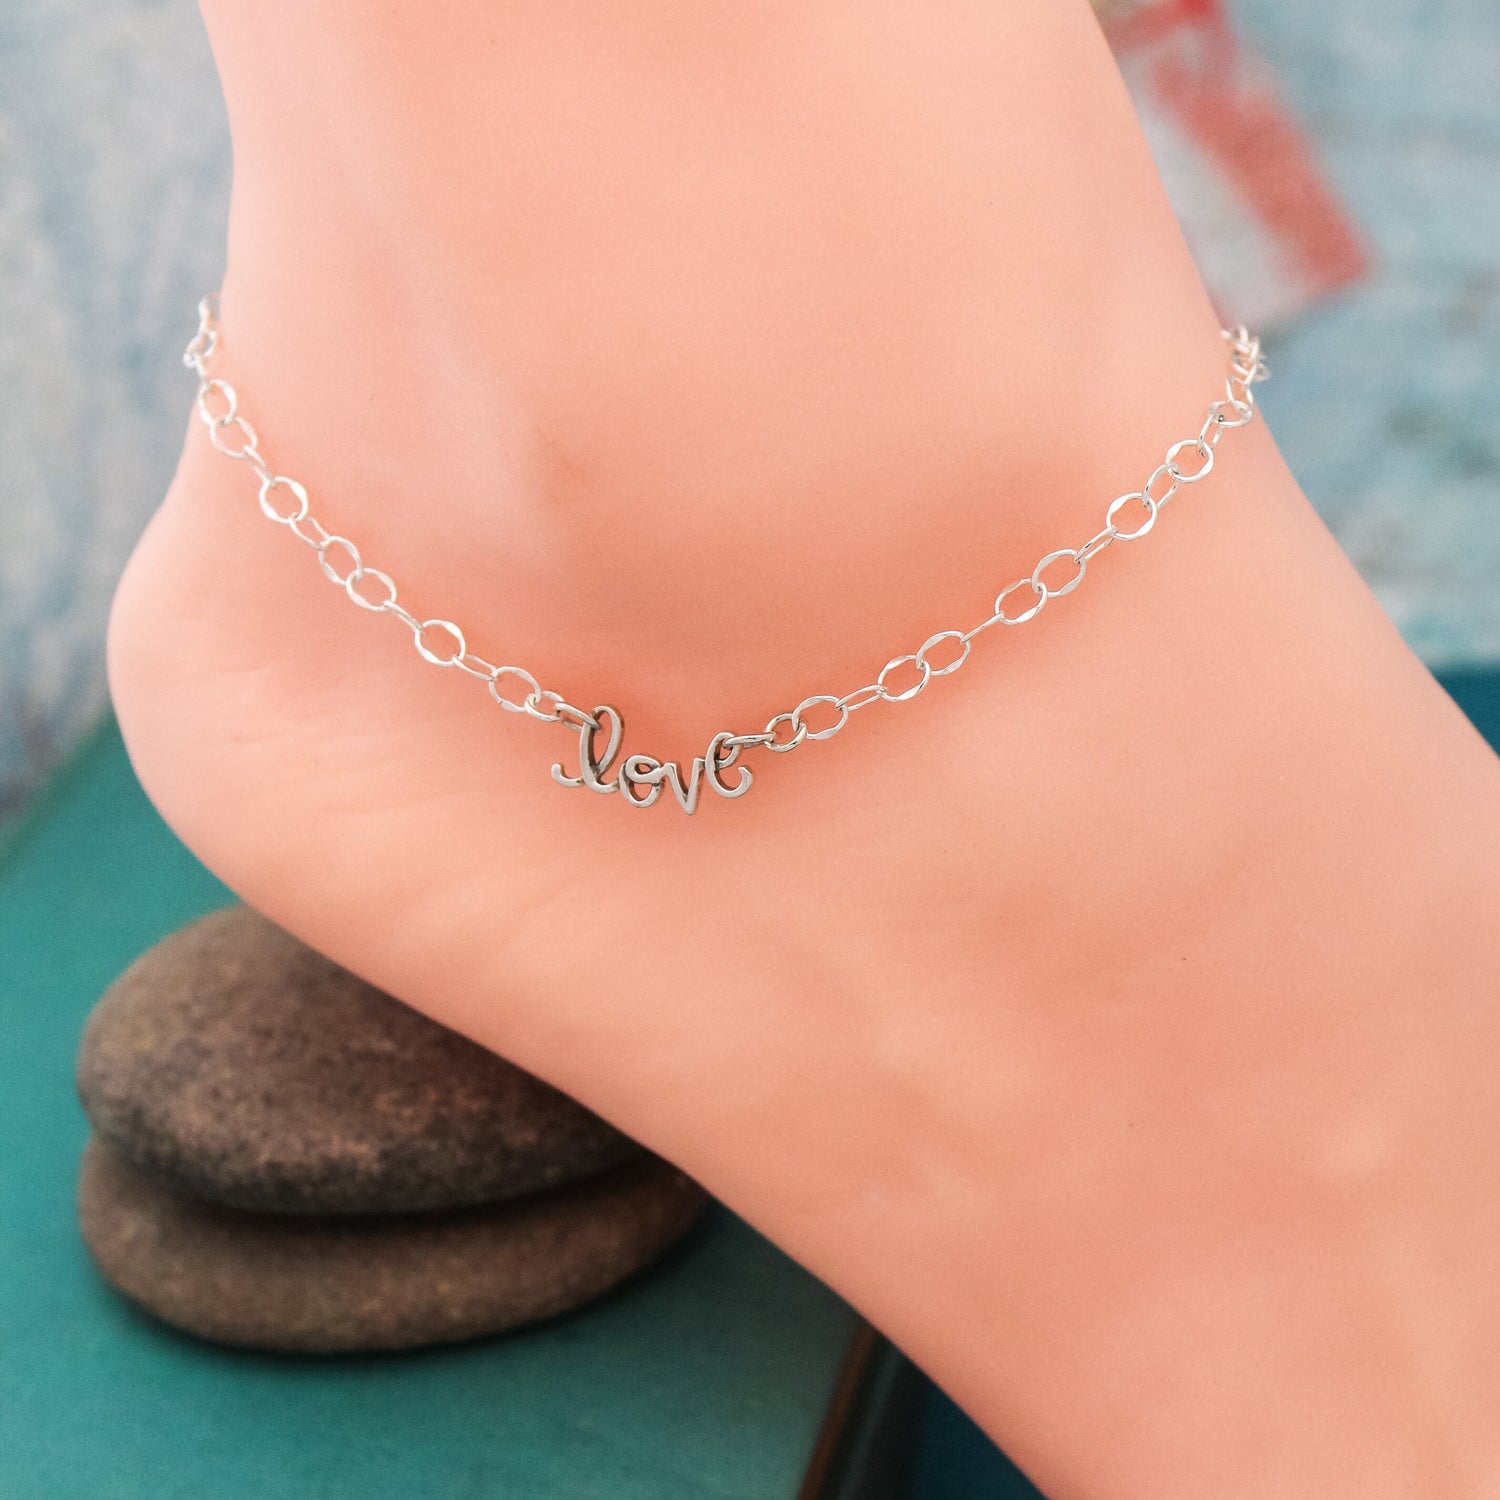 Love Anklet, Anniversary Gift, Love Charm anklet Jewelry, Love Jewelry, Sterling Silver Anklet, Gifts for Her, Summer Cruise Jewelry